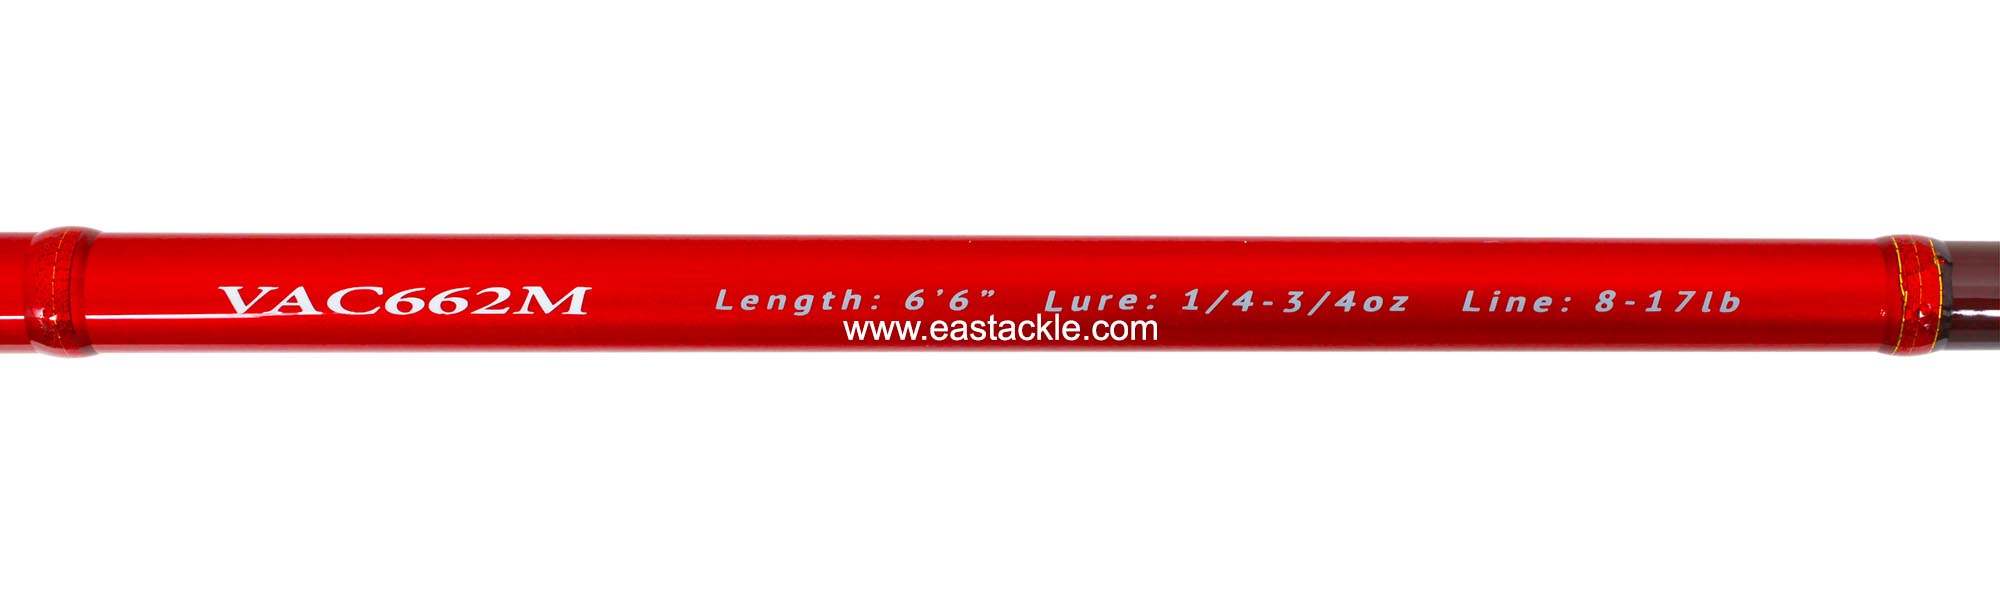 Rapala - Vaaksy - 80th Anniversary - VAC662M - Bait Casting Rod - Blank Specifications (Top View) | Eastackle